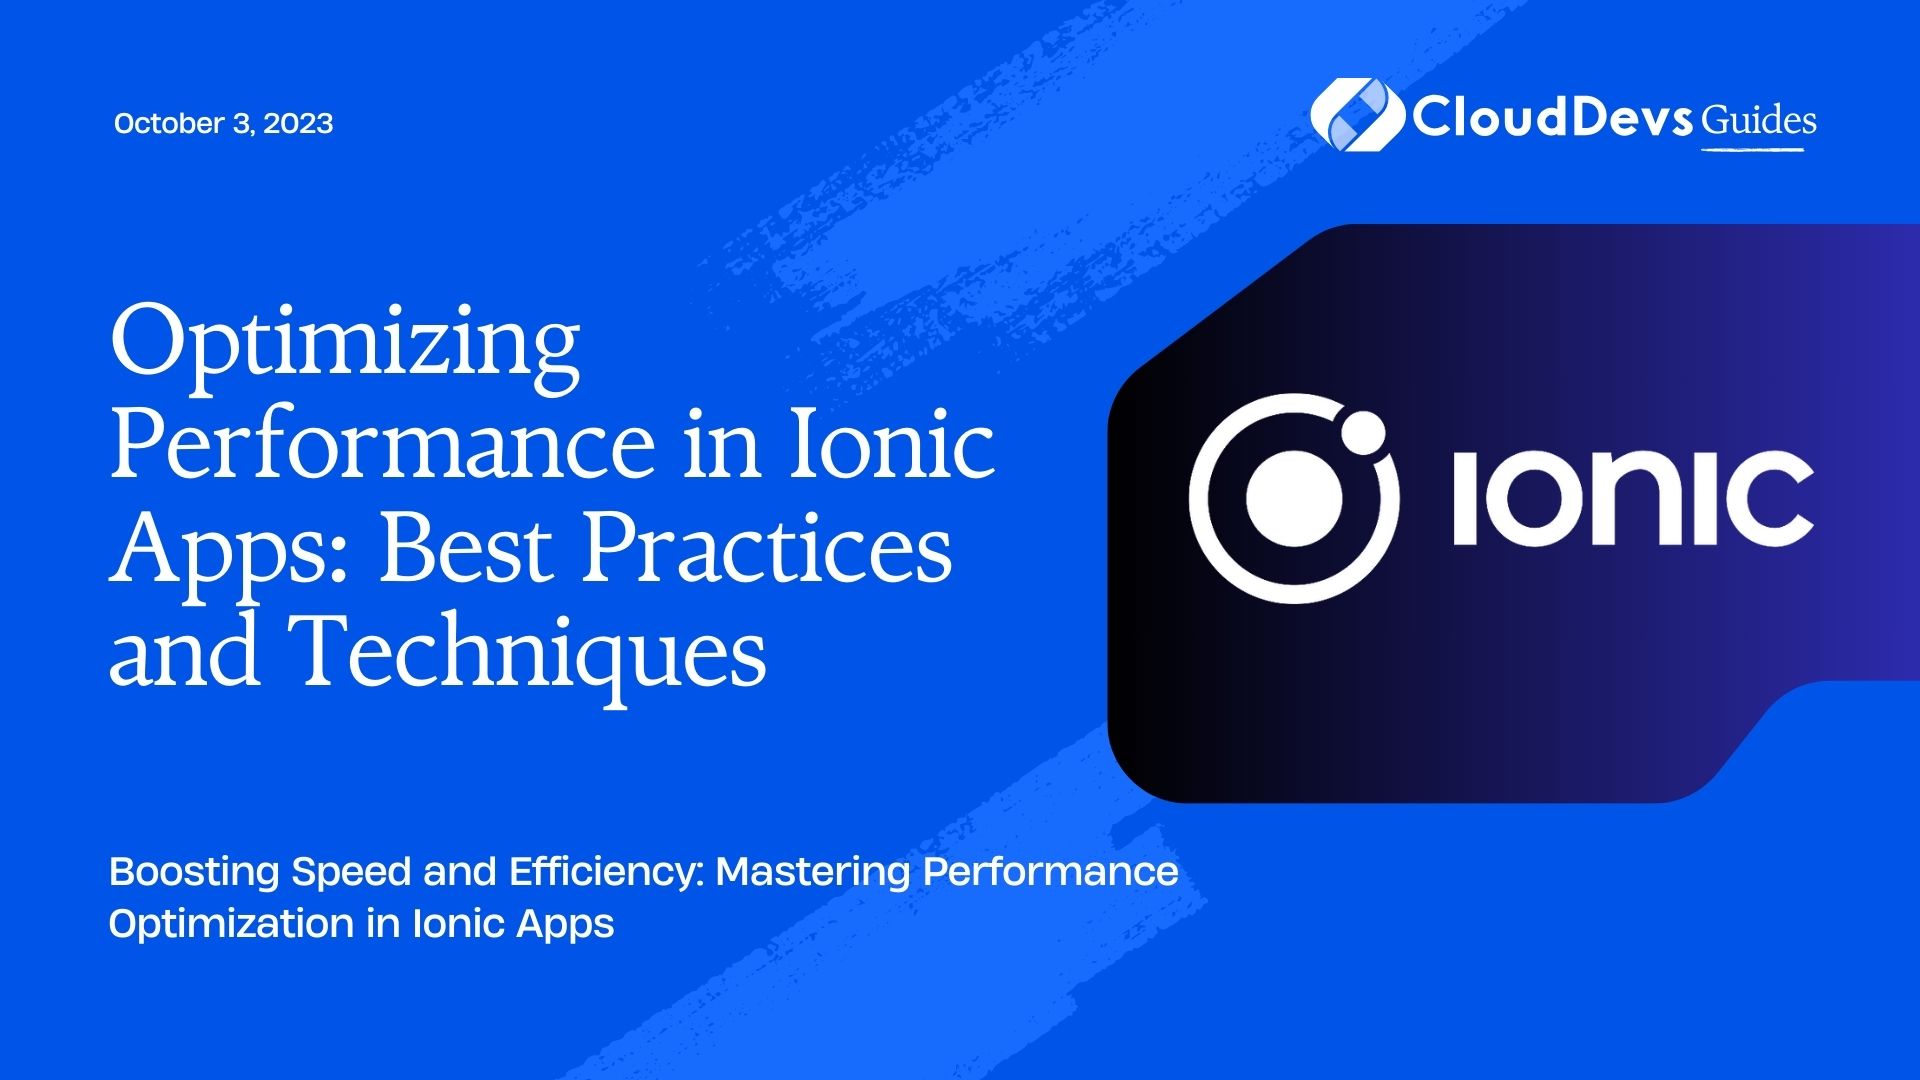 Optimizing Performance in Ionic Apps: Best Practices and Techniques